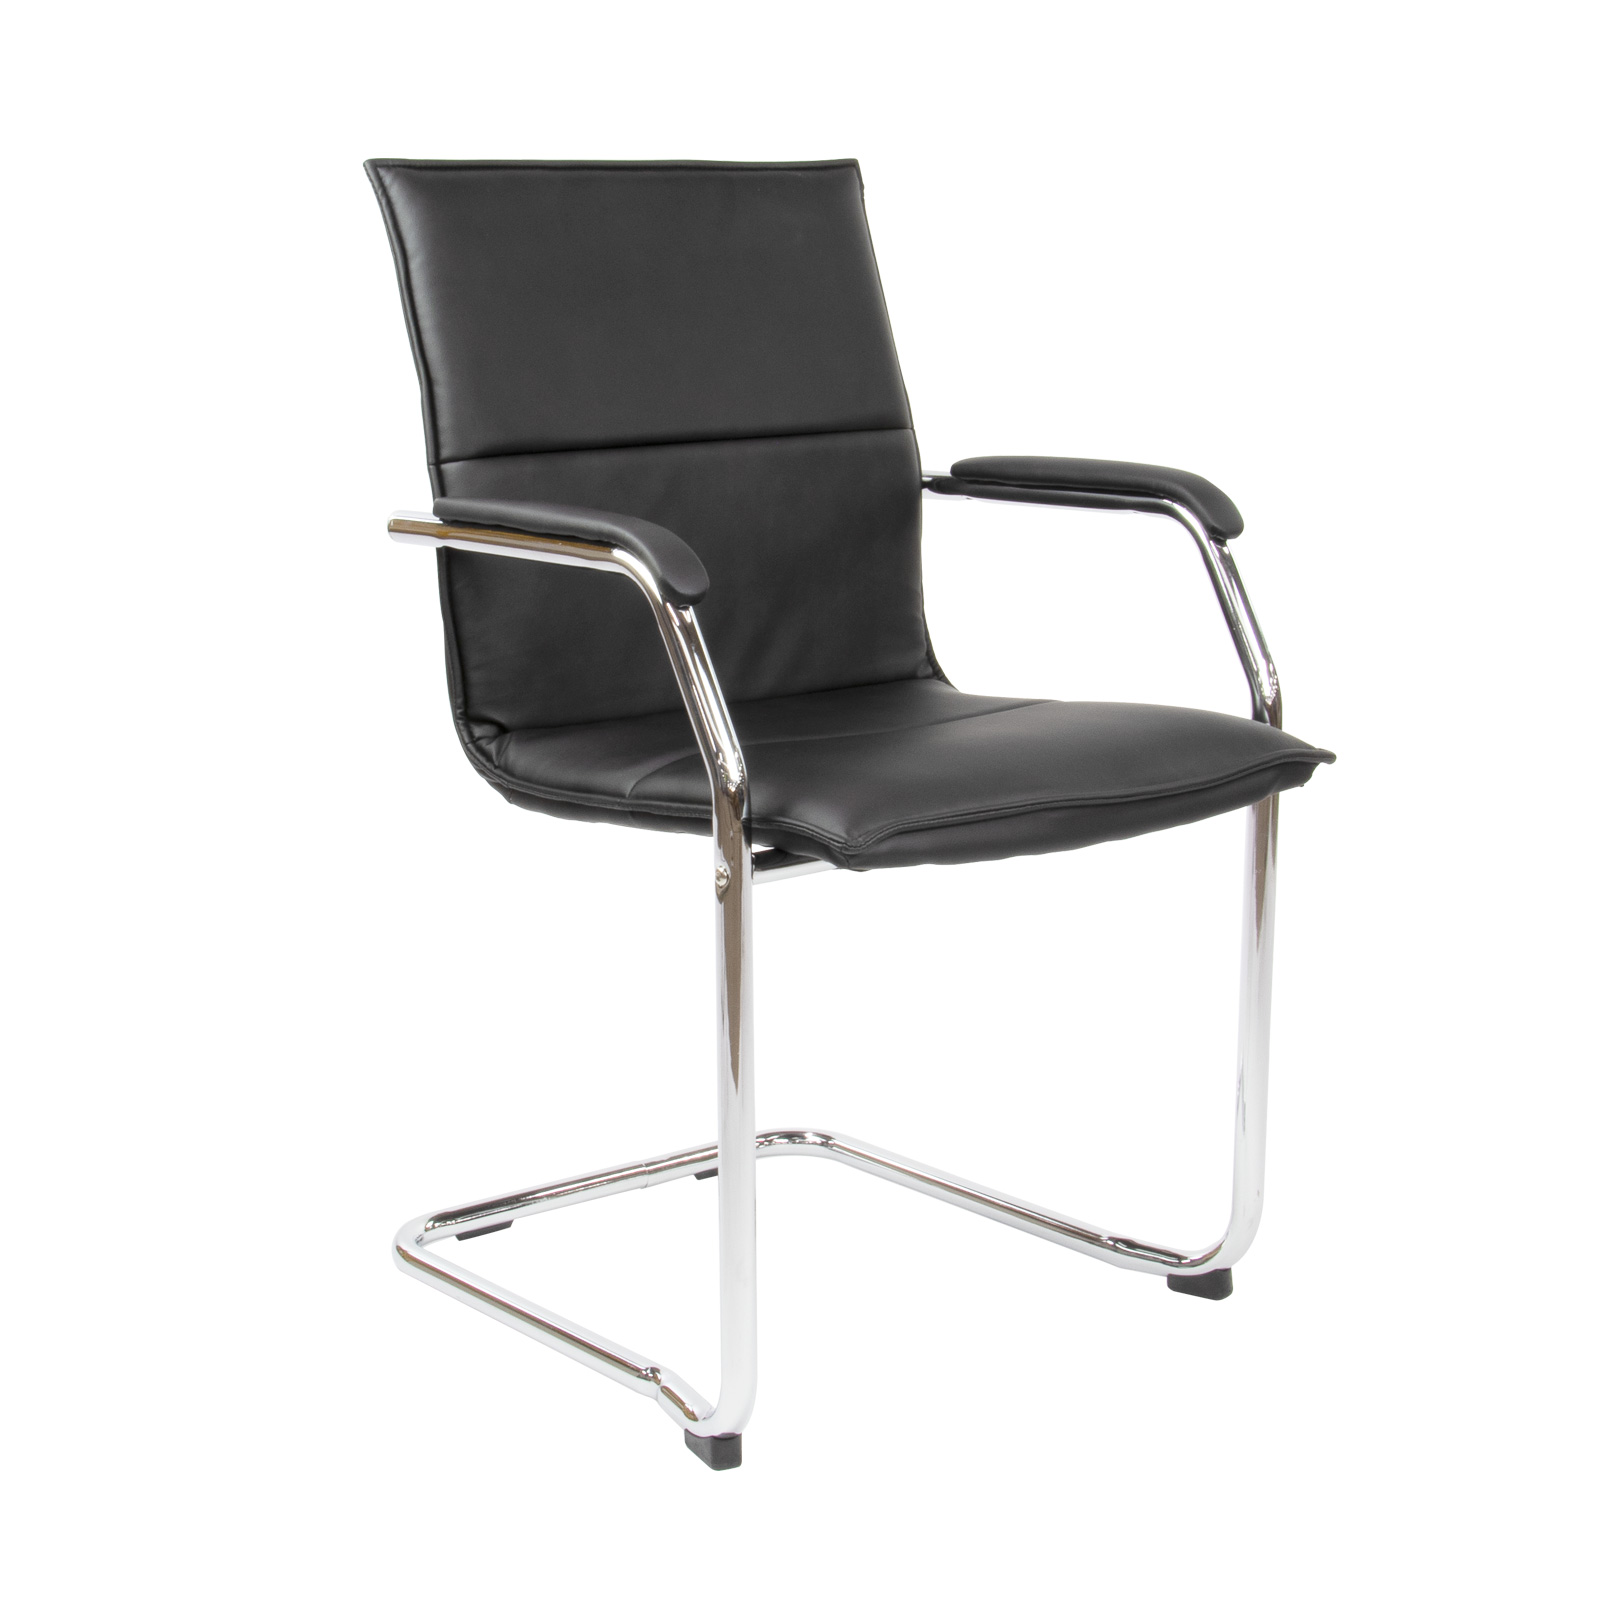 Boardroom / Meeting Essen stackable meeting room cantilever chair - black faux leather